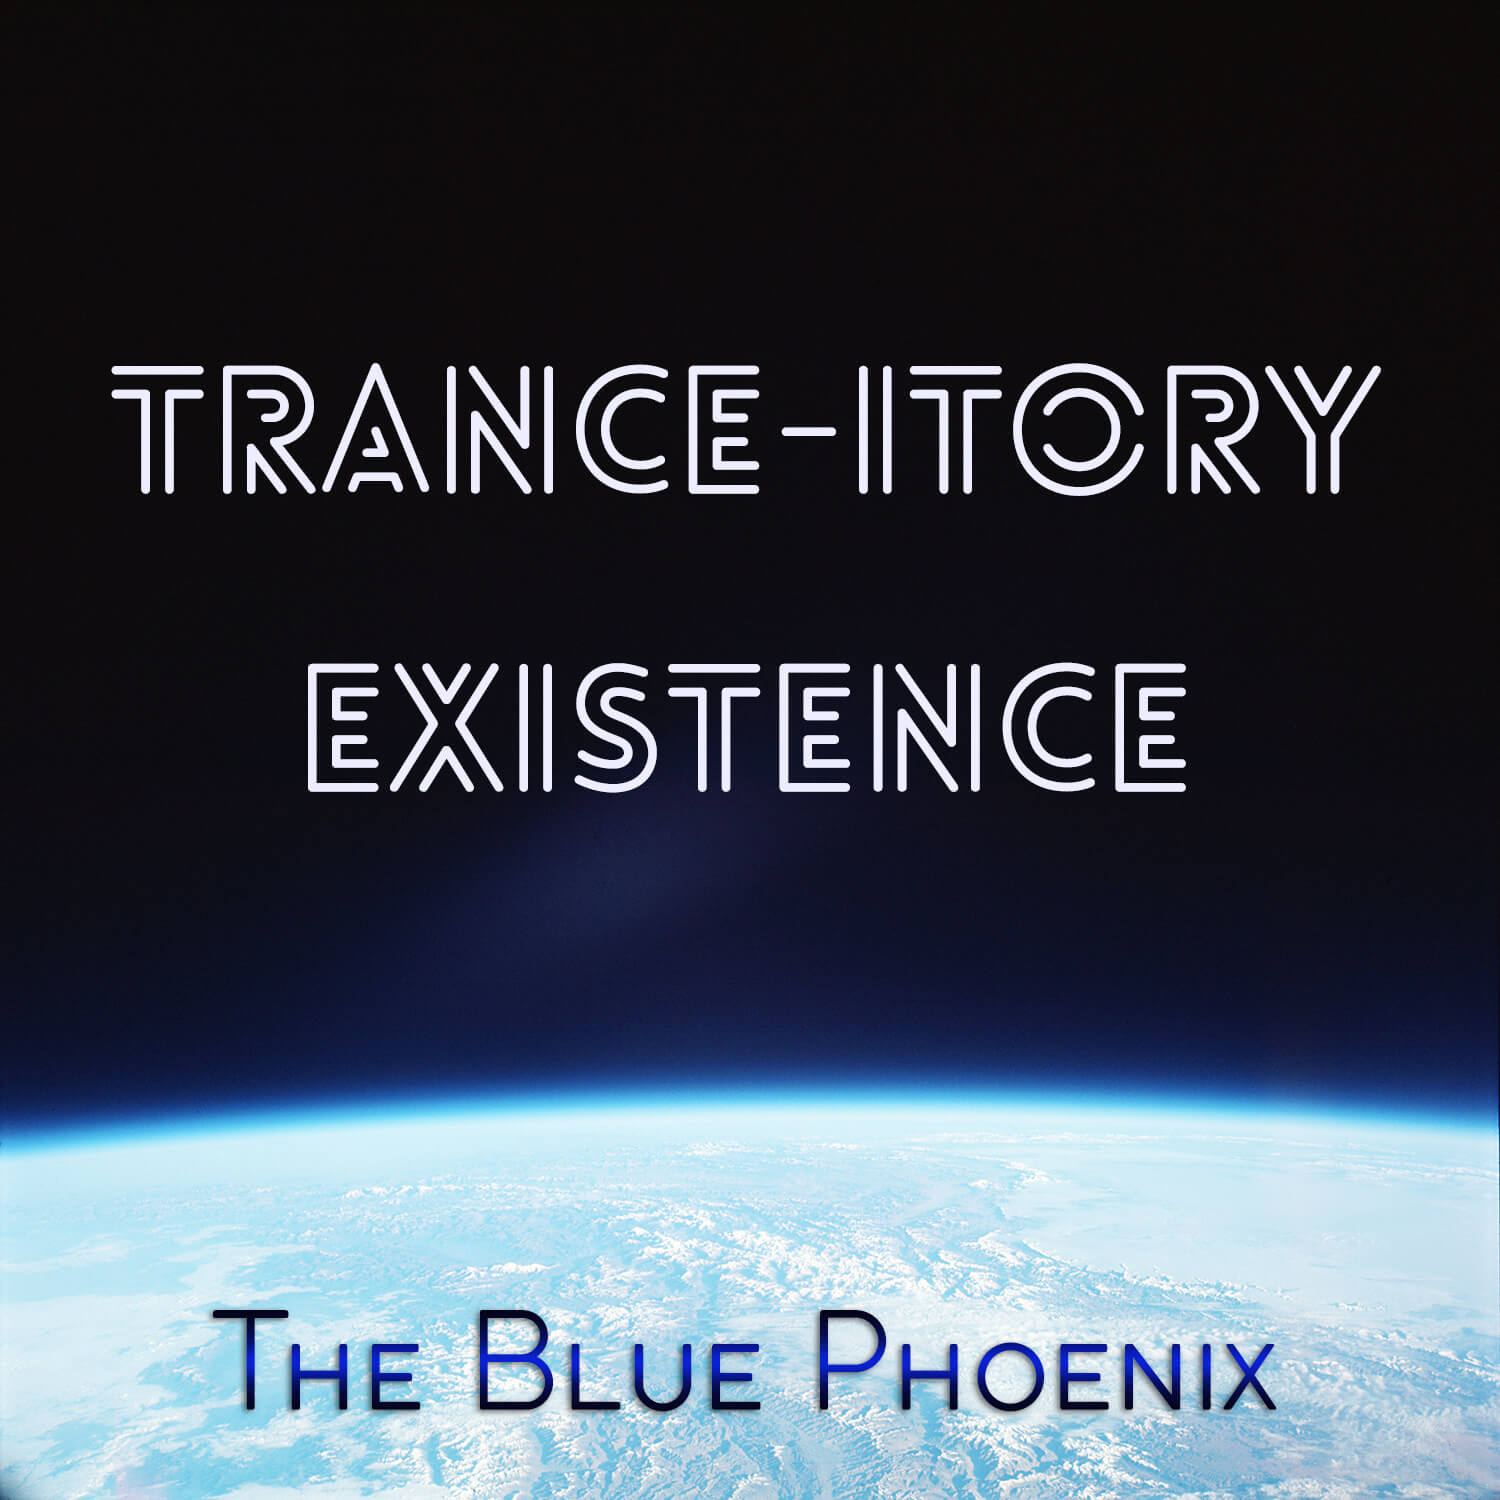 vivid space image overlooking planet earth as cover image for Blue Phoenix album Trance-itory Existence